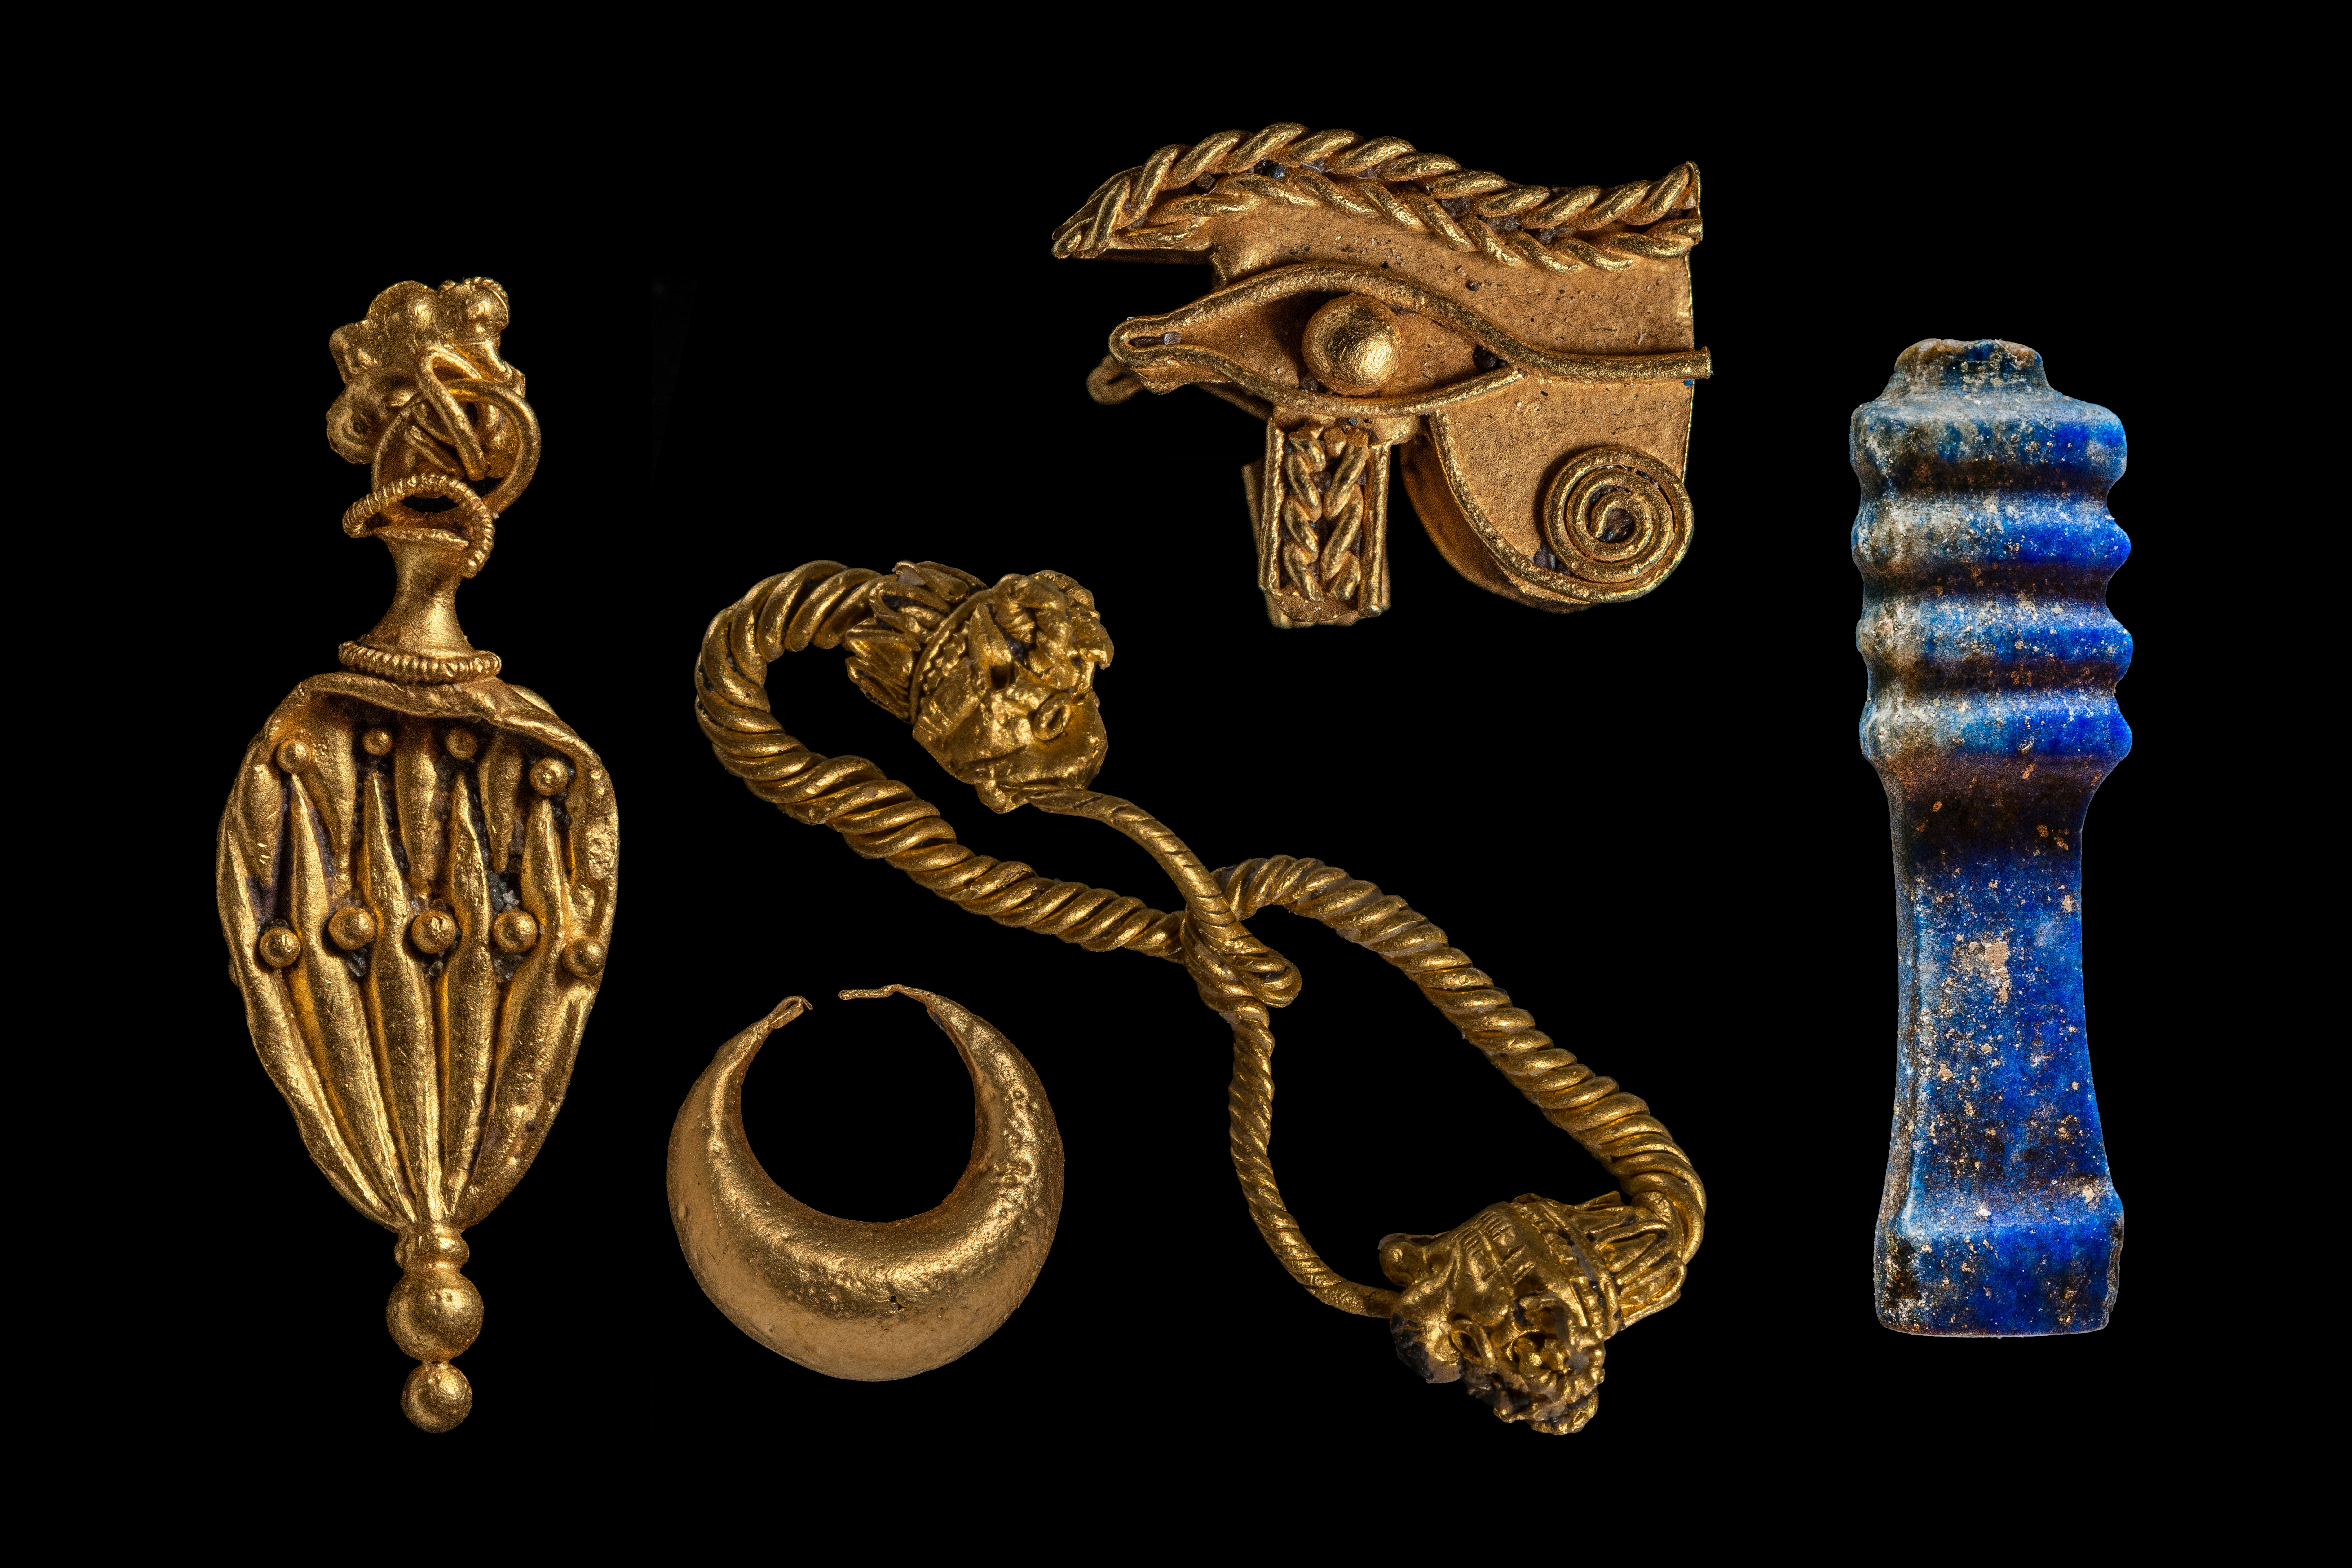 Gold objects, jewellery and a Djed pilar, a symbol of stability made of lapis lazuli, were retrieved